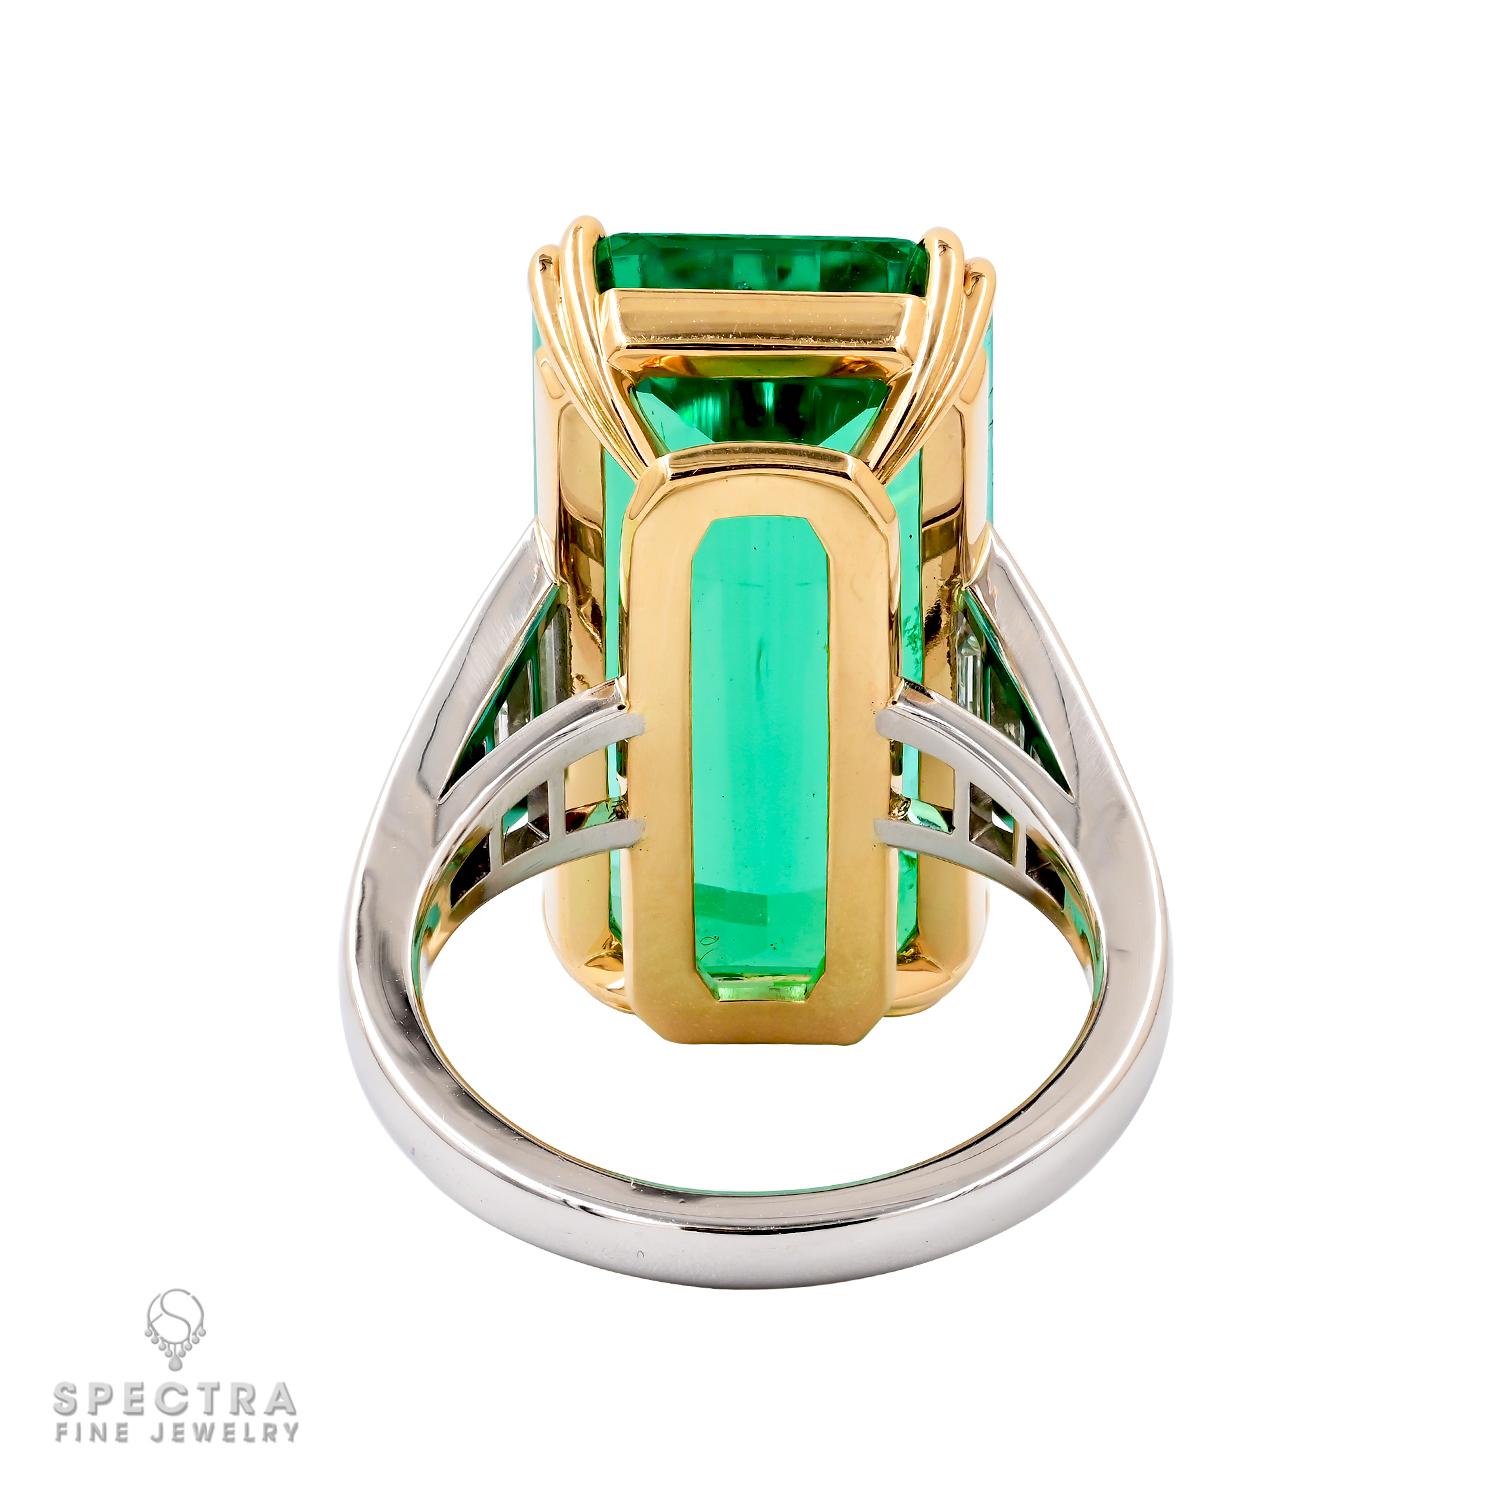 Octagon Cut Spectra Fine Jewelry, Certified 15.91 Carat Colombian Emerald Ring For Sale